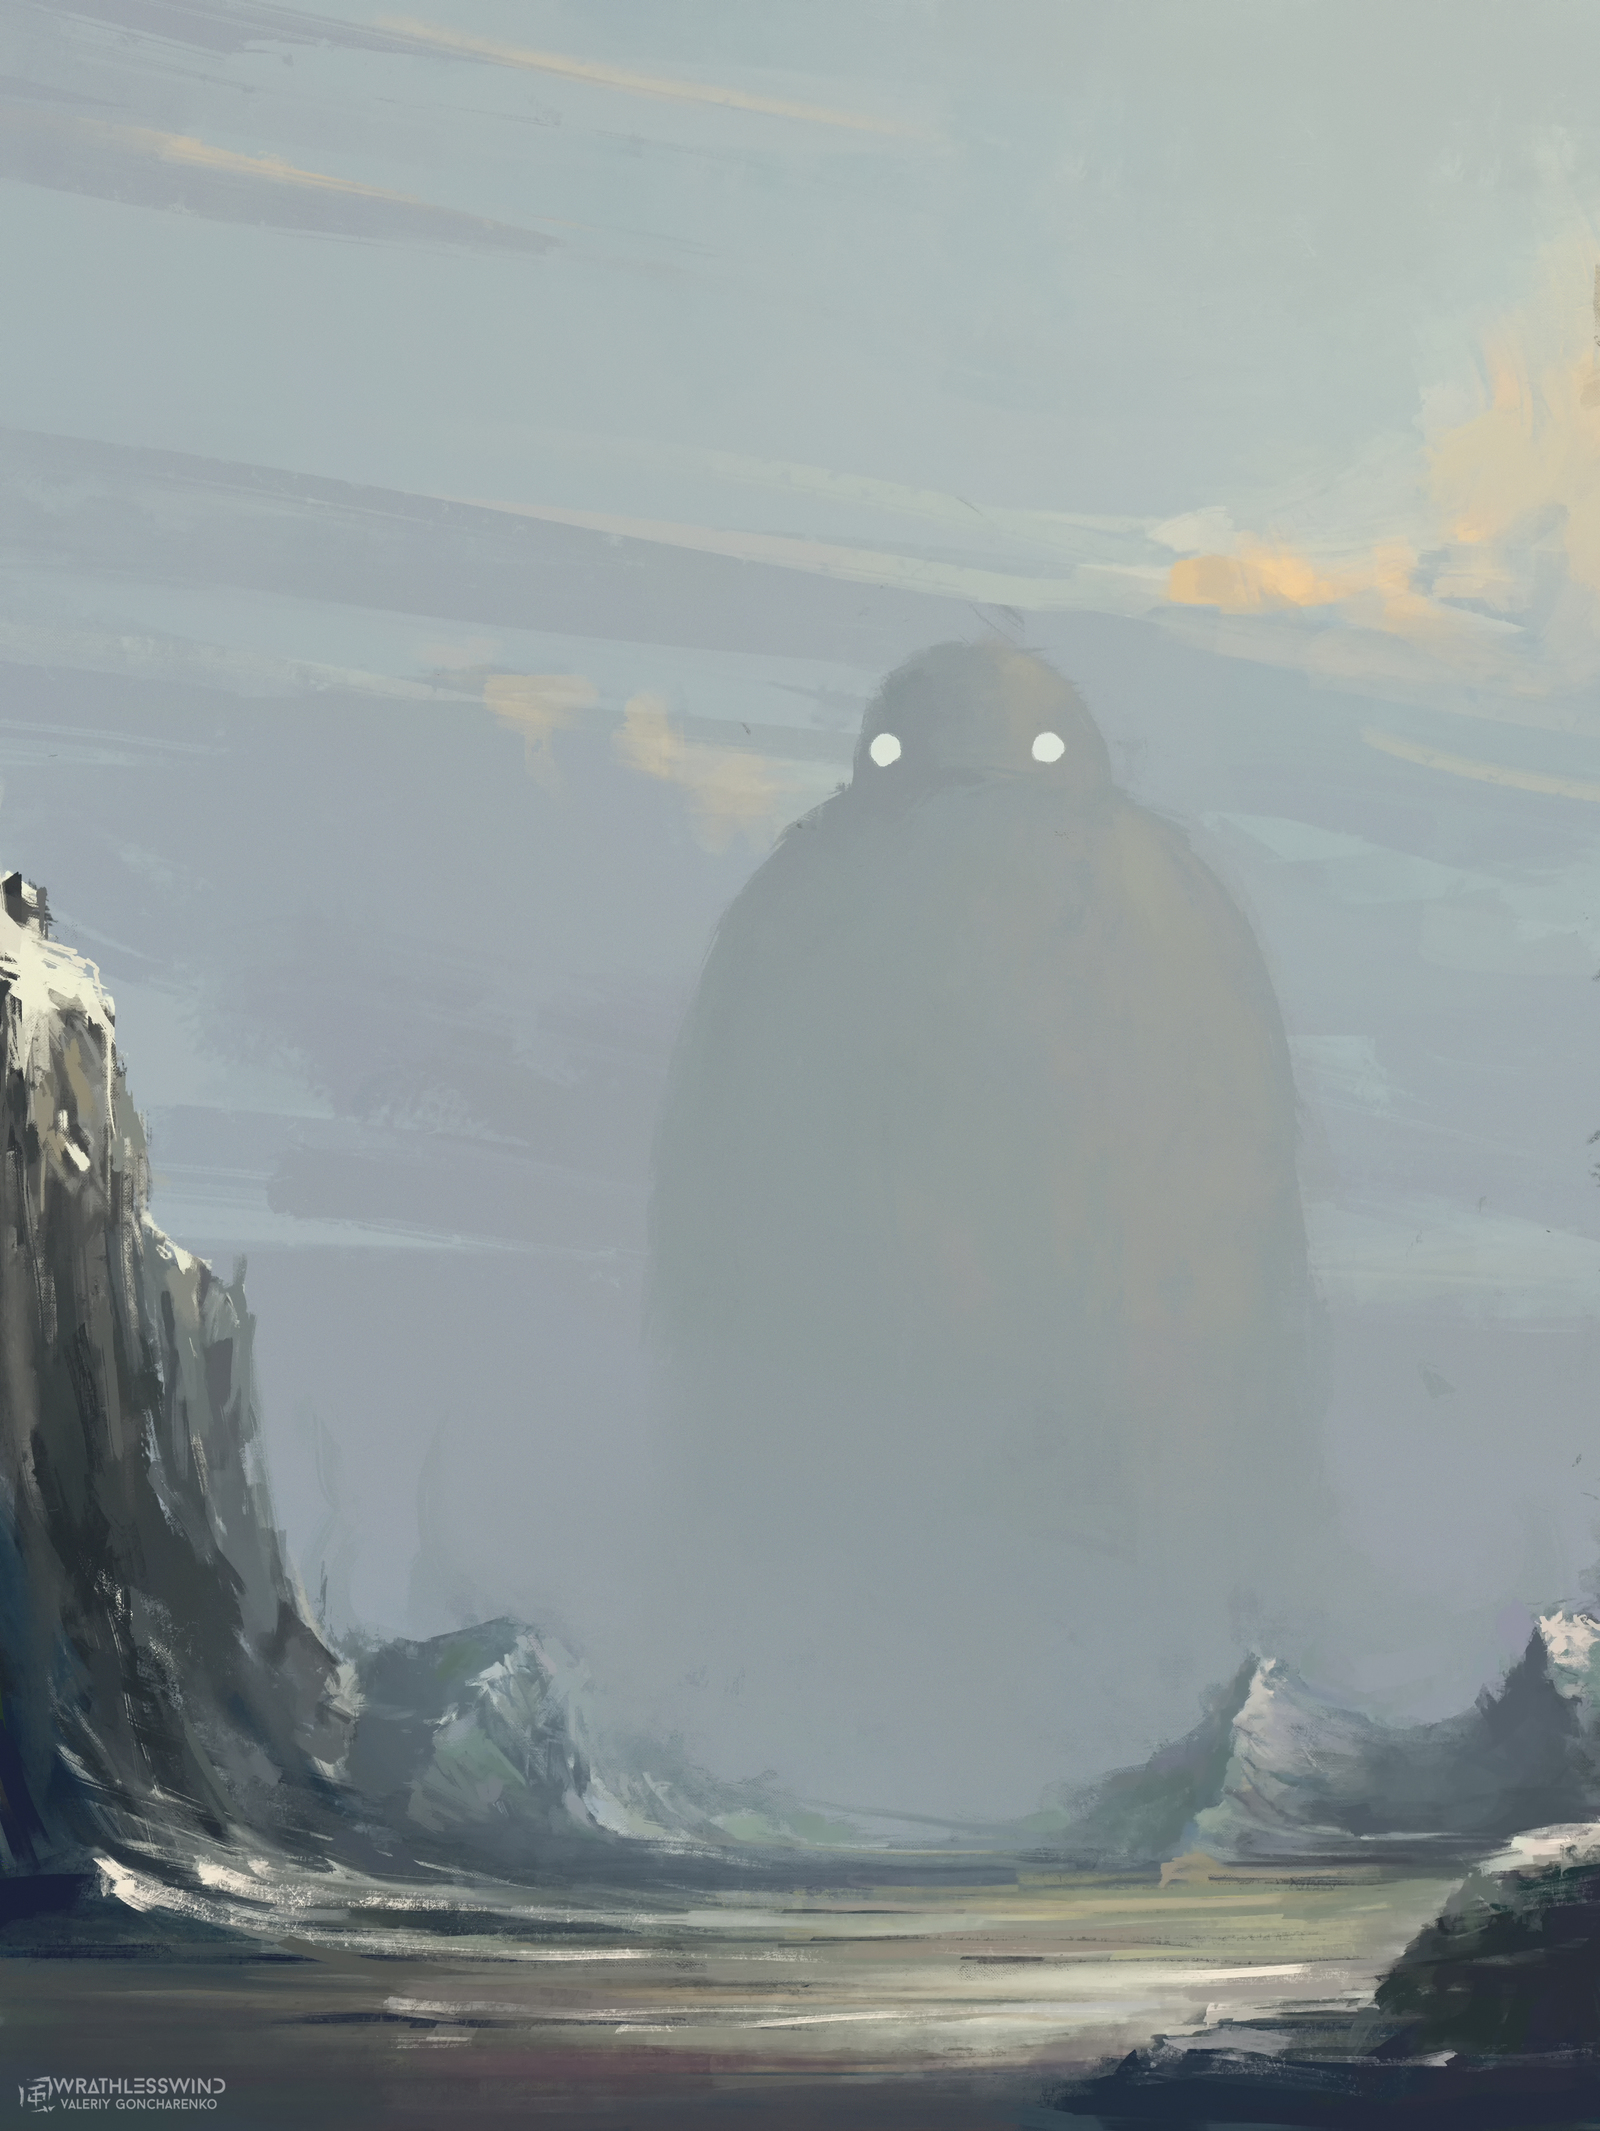 You go, I'll wait here - My, Veowind, Digital drawing, Landscape, Fantasy, Creatures, The mountains, Clouds, torn world